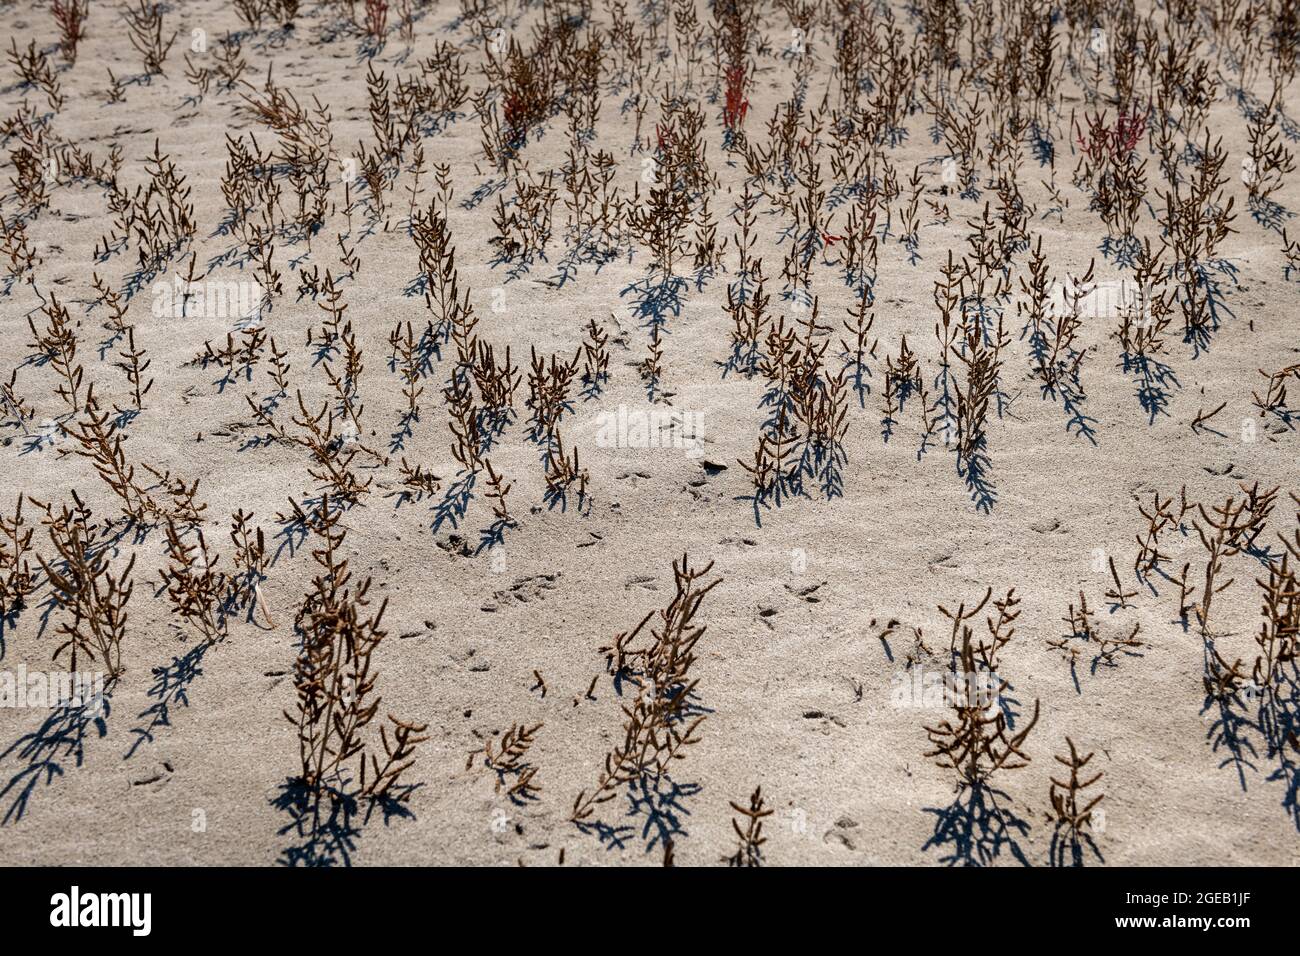 Plants dying or dead on arid land brought about by climate change. Stock Photo